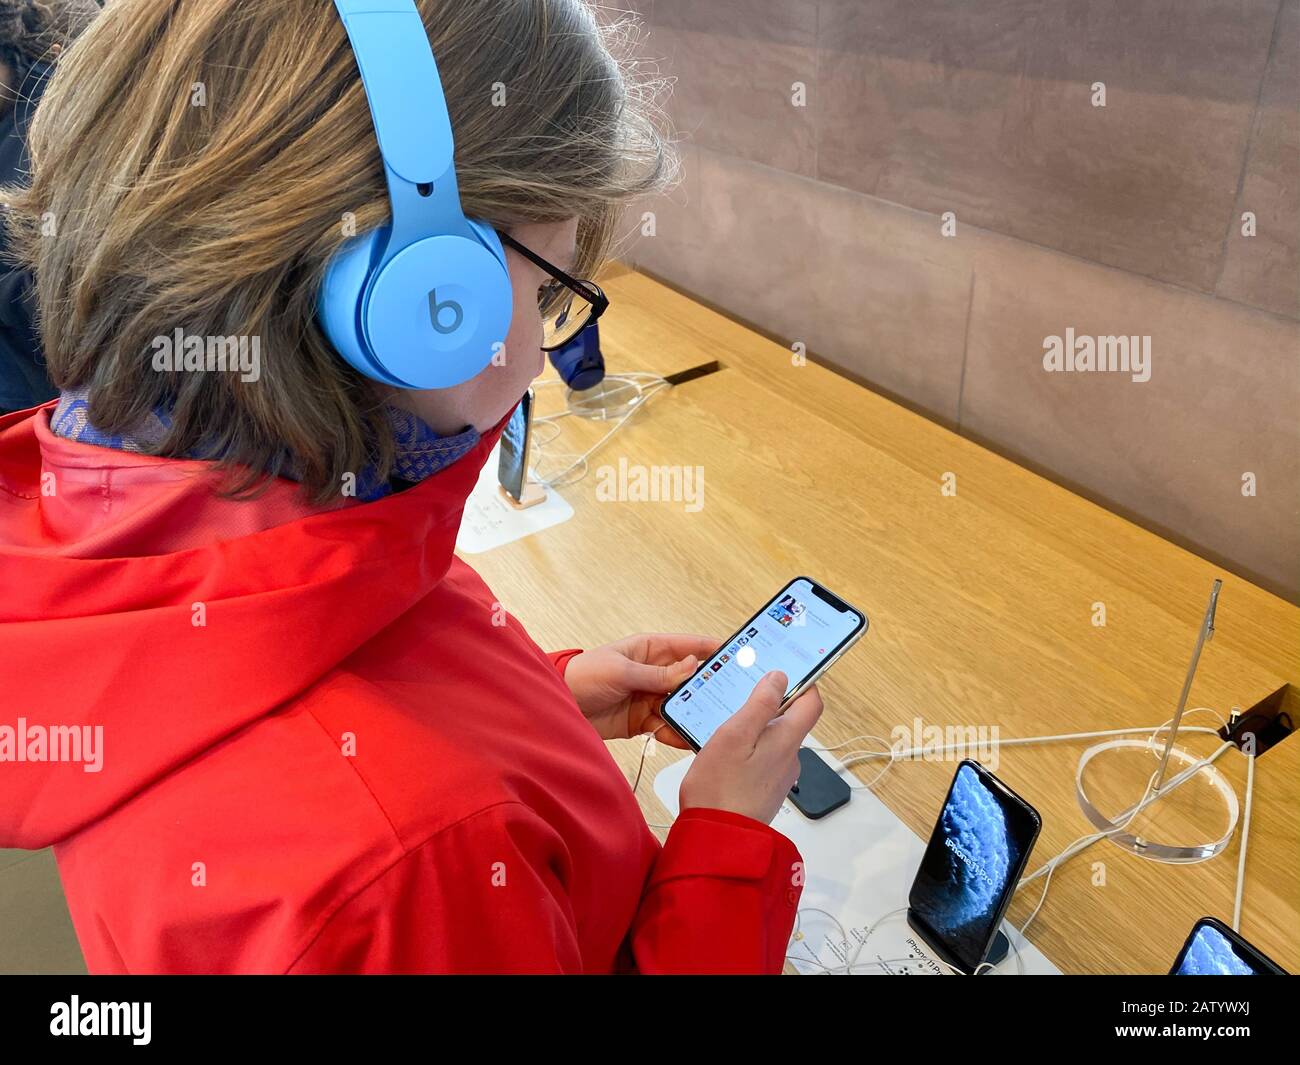 Paris, France - Nov 02, 2019: Side view woman in red coat inside Apple Computers Store testing listening to music with new latest Beats by Dr Dre Solo Pro Active Noise Cancelling headphones Stock Photo